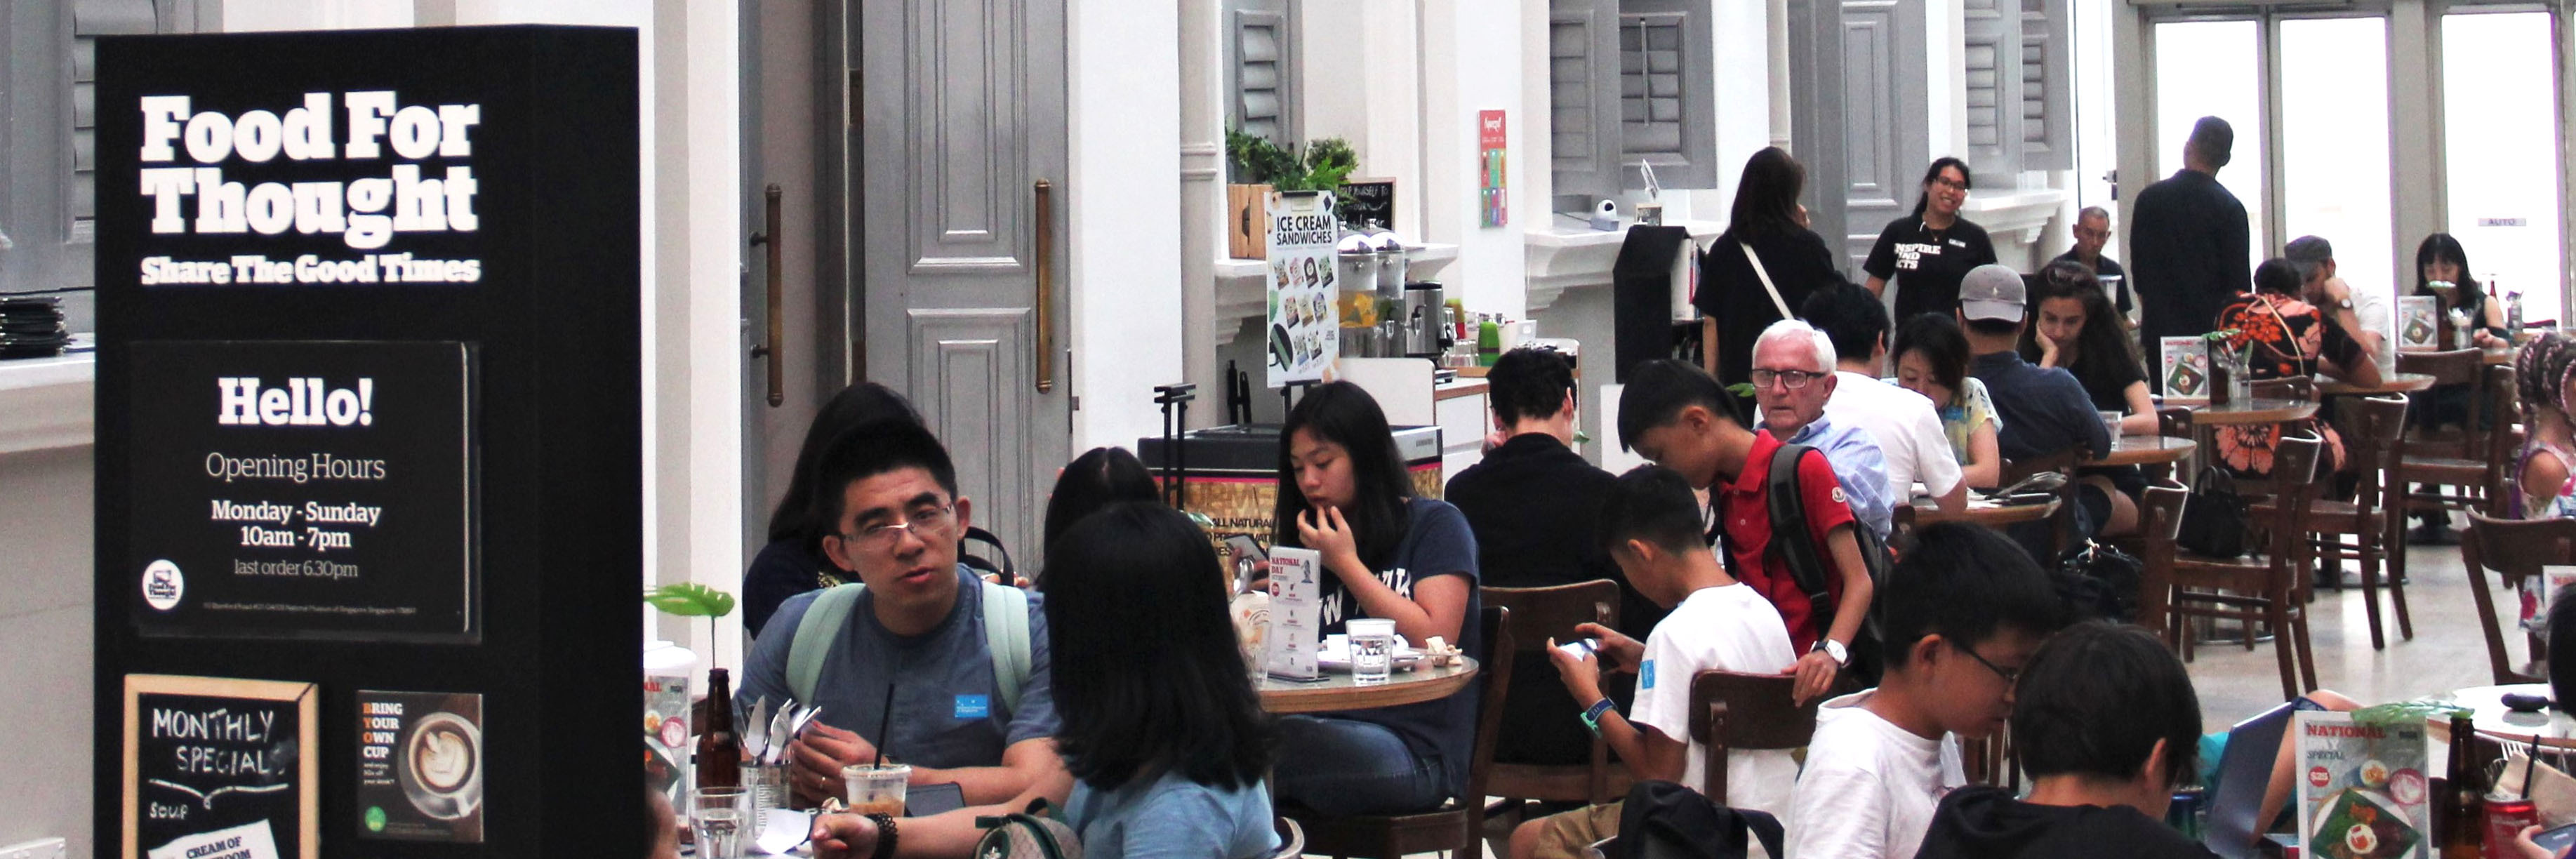 At Food for Thought, you can have a tasty meal that uplifts the underprivileged. Photo by Lin Yanqin